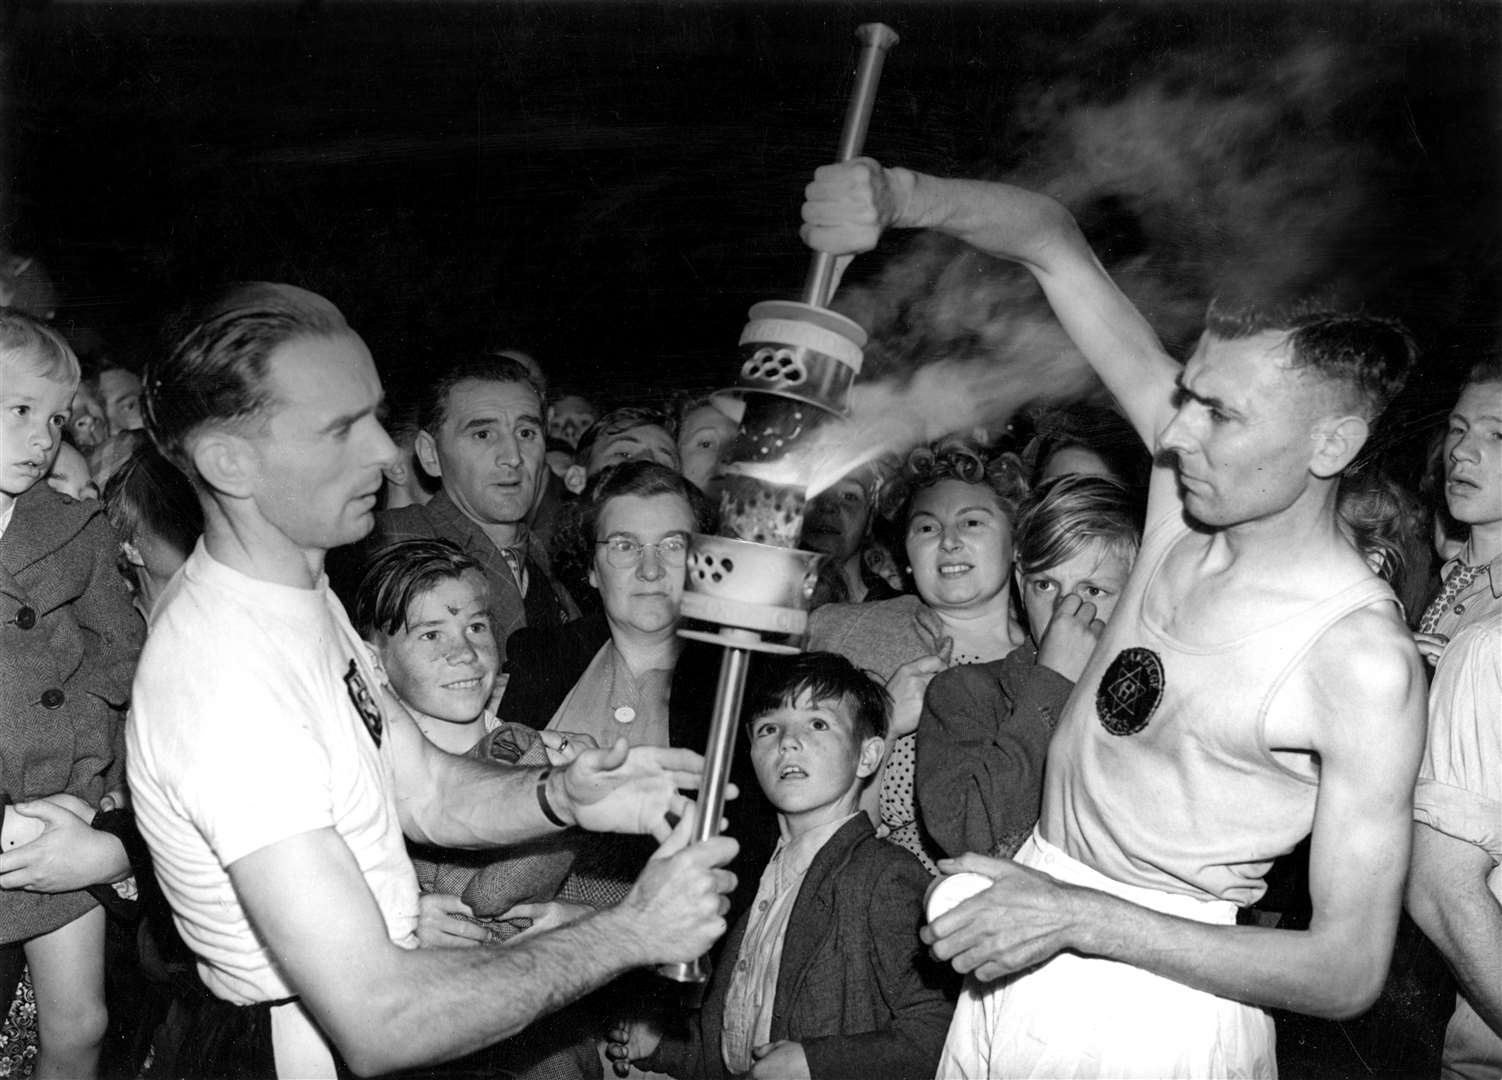 The torch was carried through Maidstone on its way to the 1948 Games in London. Picture from 'Images of Maidstone'